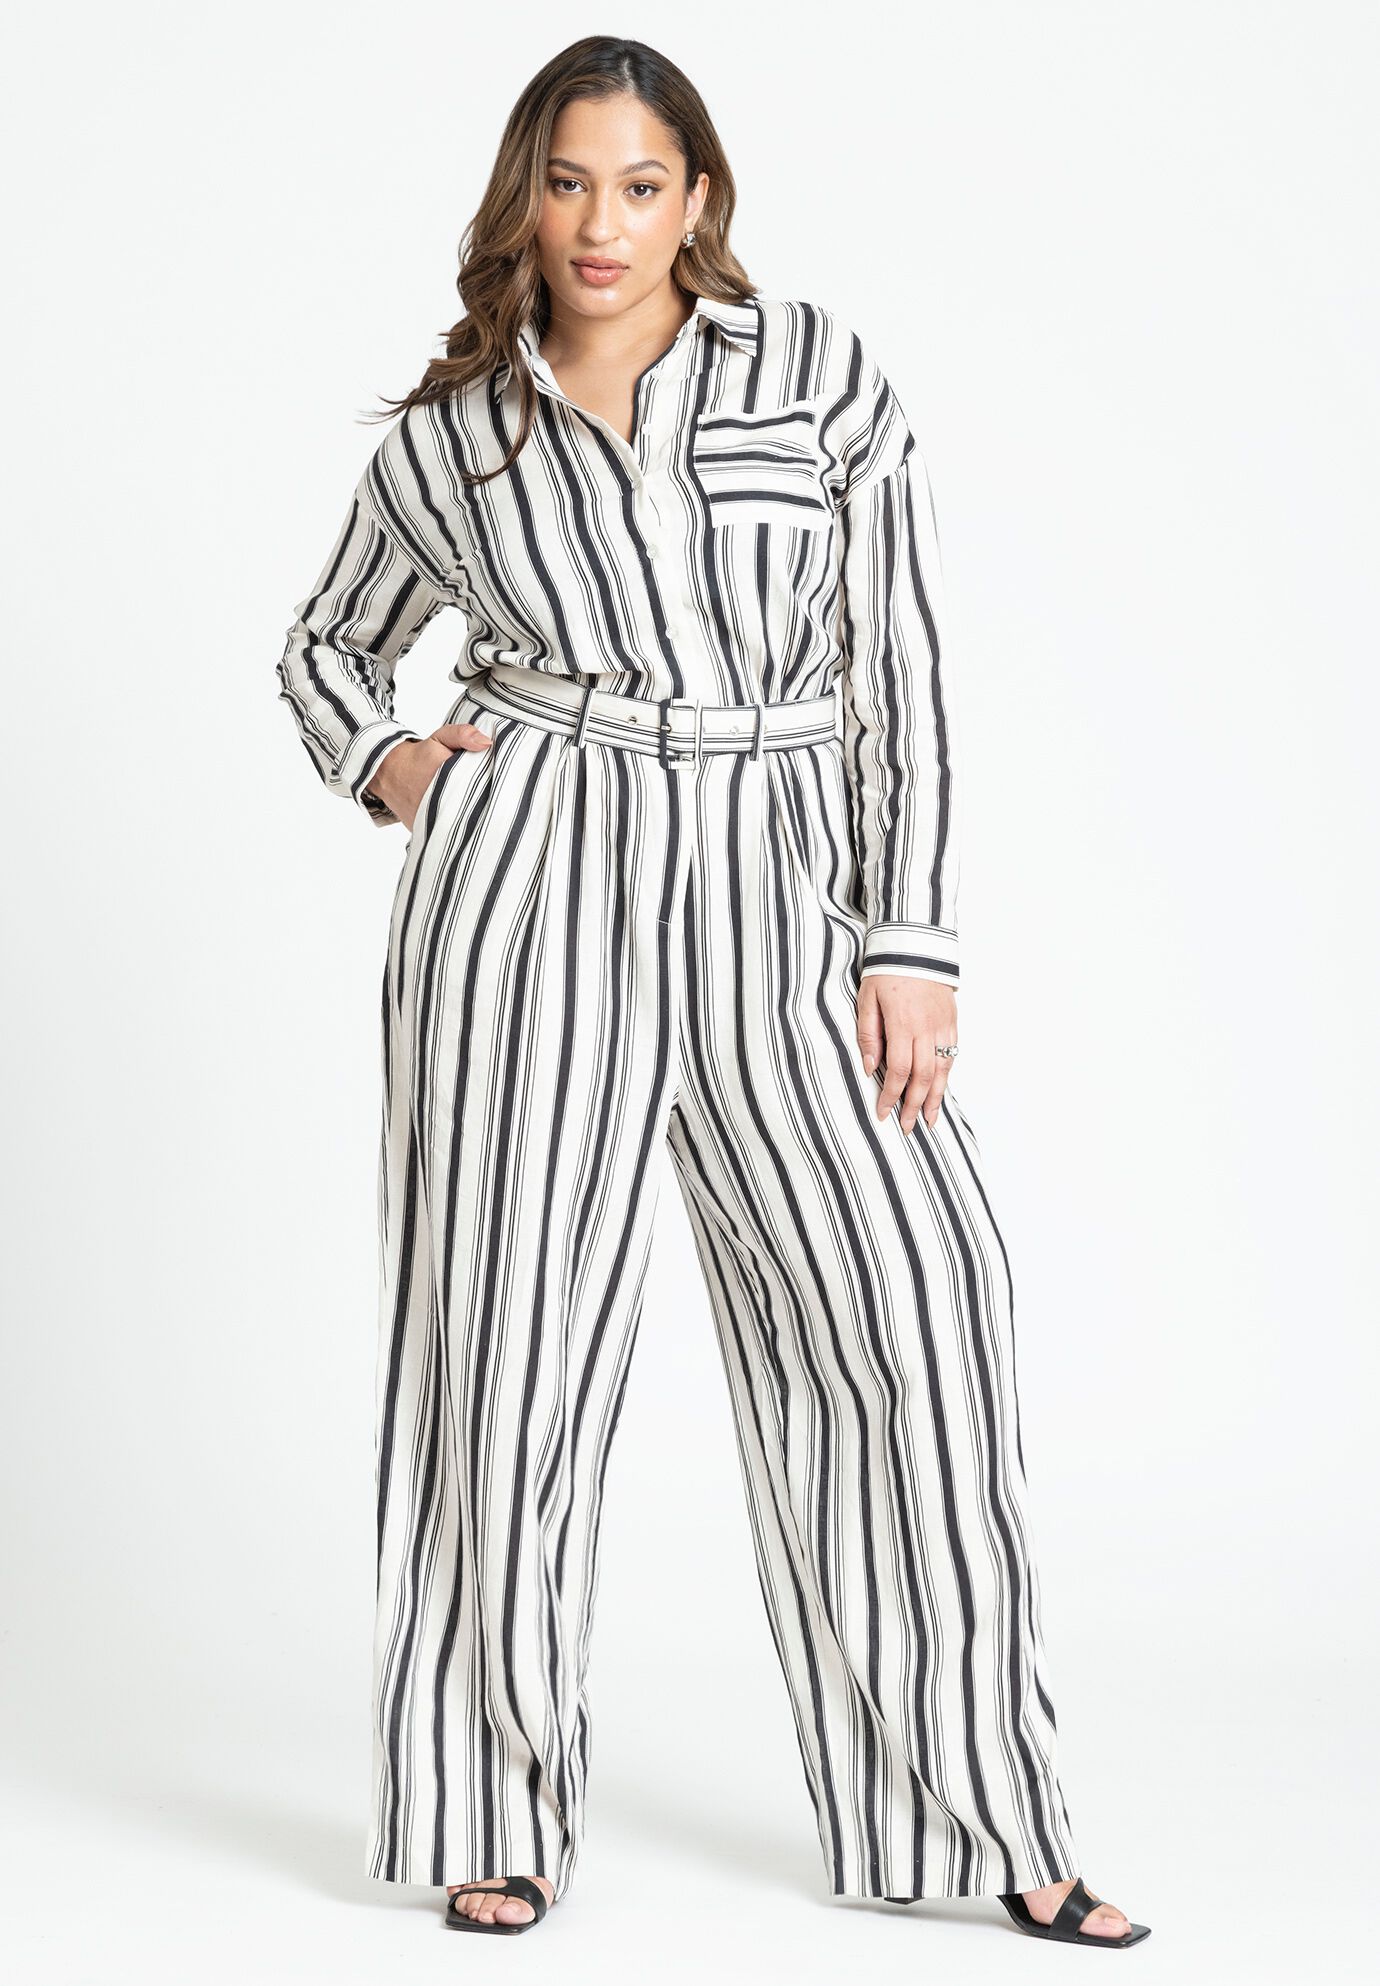 Plus Size Striped Print Floor Length Long Sleeves Dropped Shoulder Belted Pocketed Pleated Collared Jumpsuit